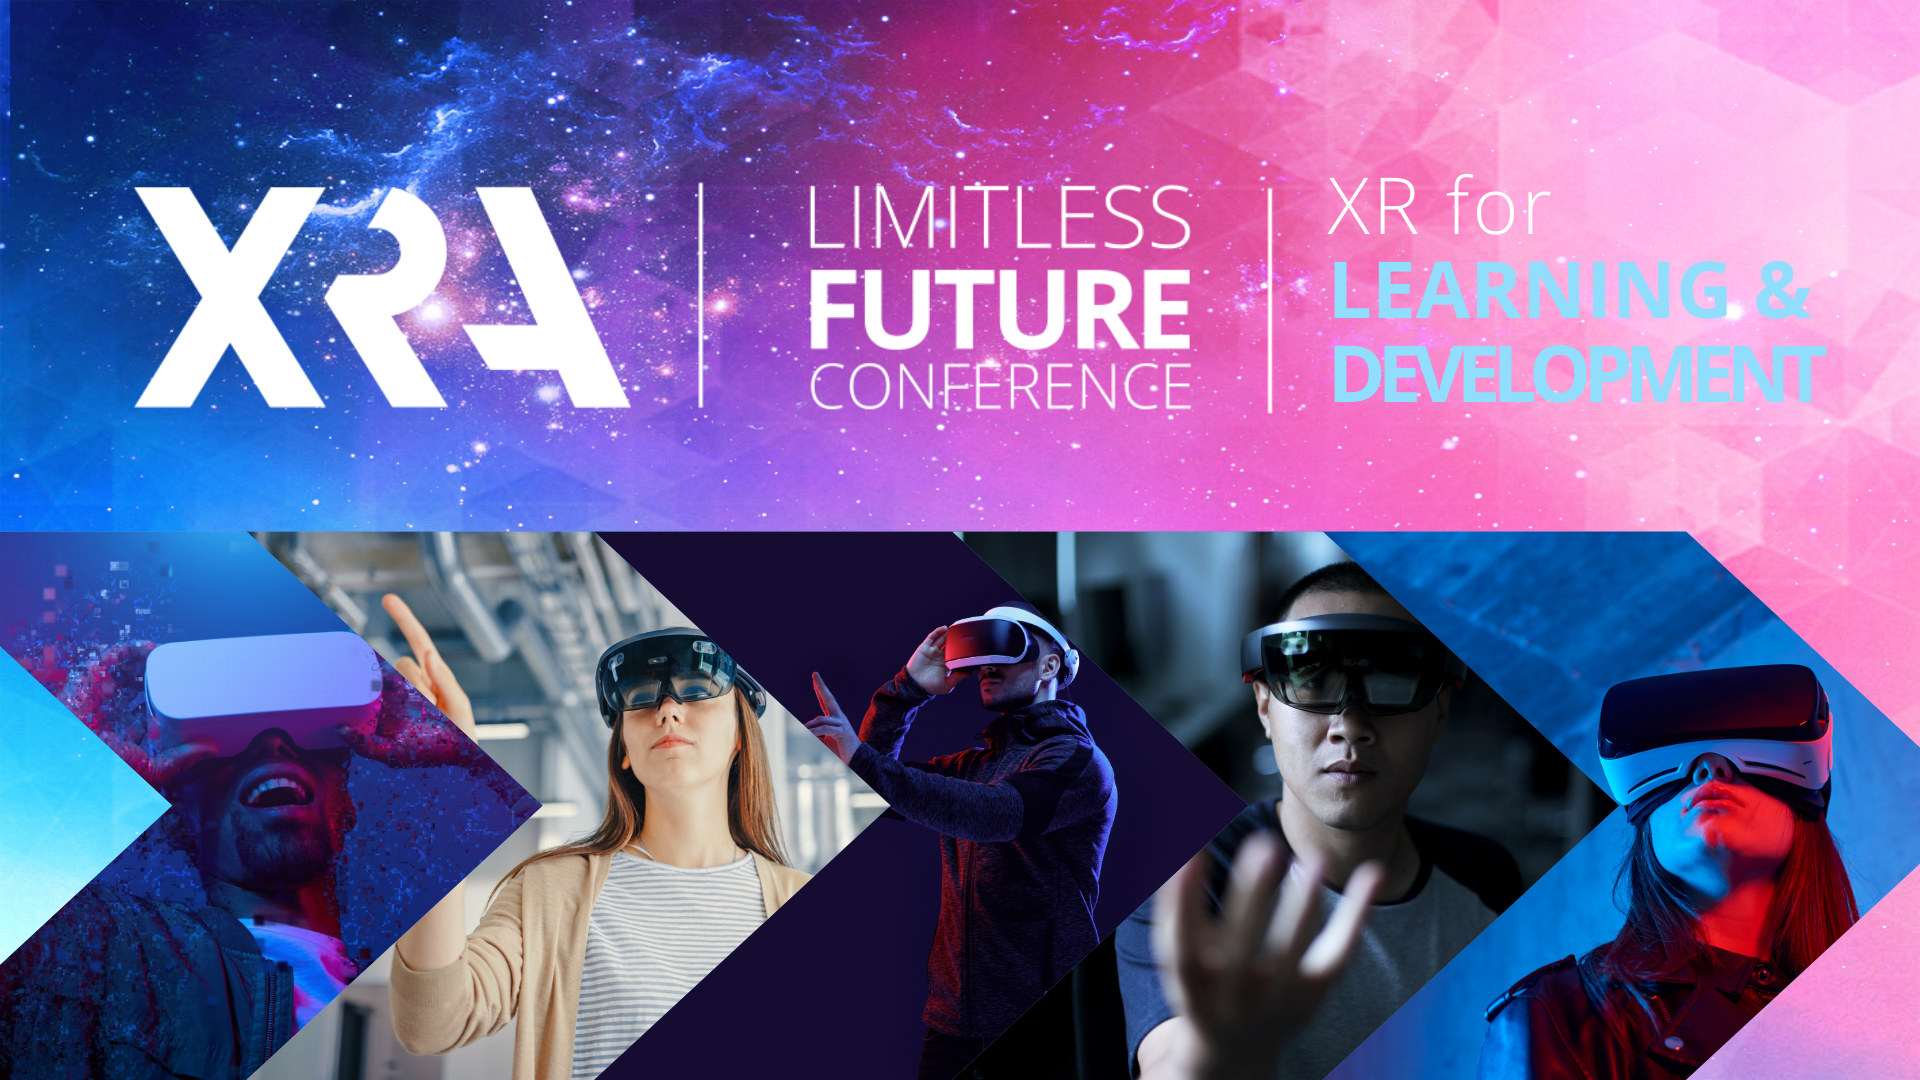 LEARN ABOUT THE LIMITLESS POTENTIAL OF XR FOR WORKFORCE TRAINING